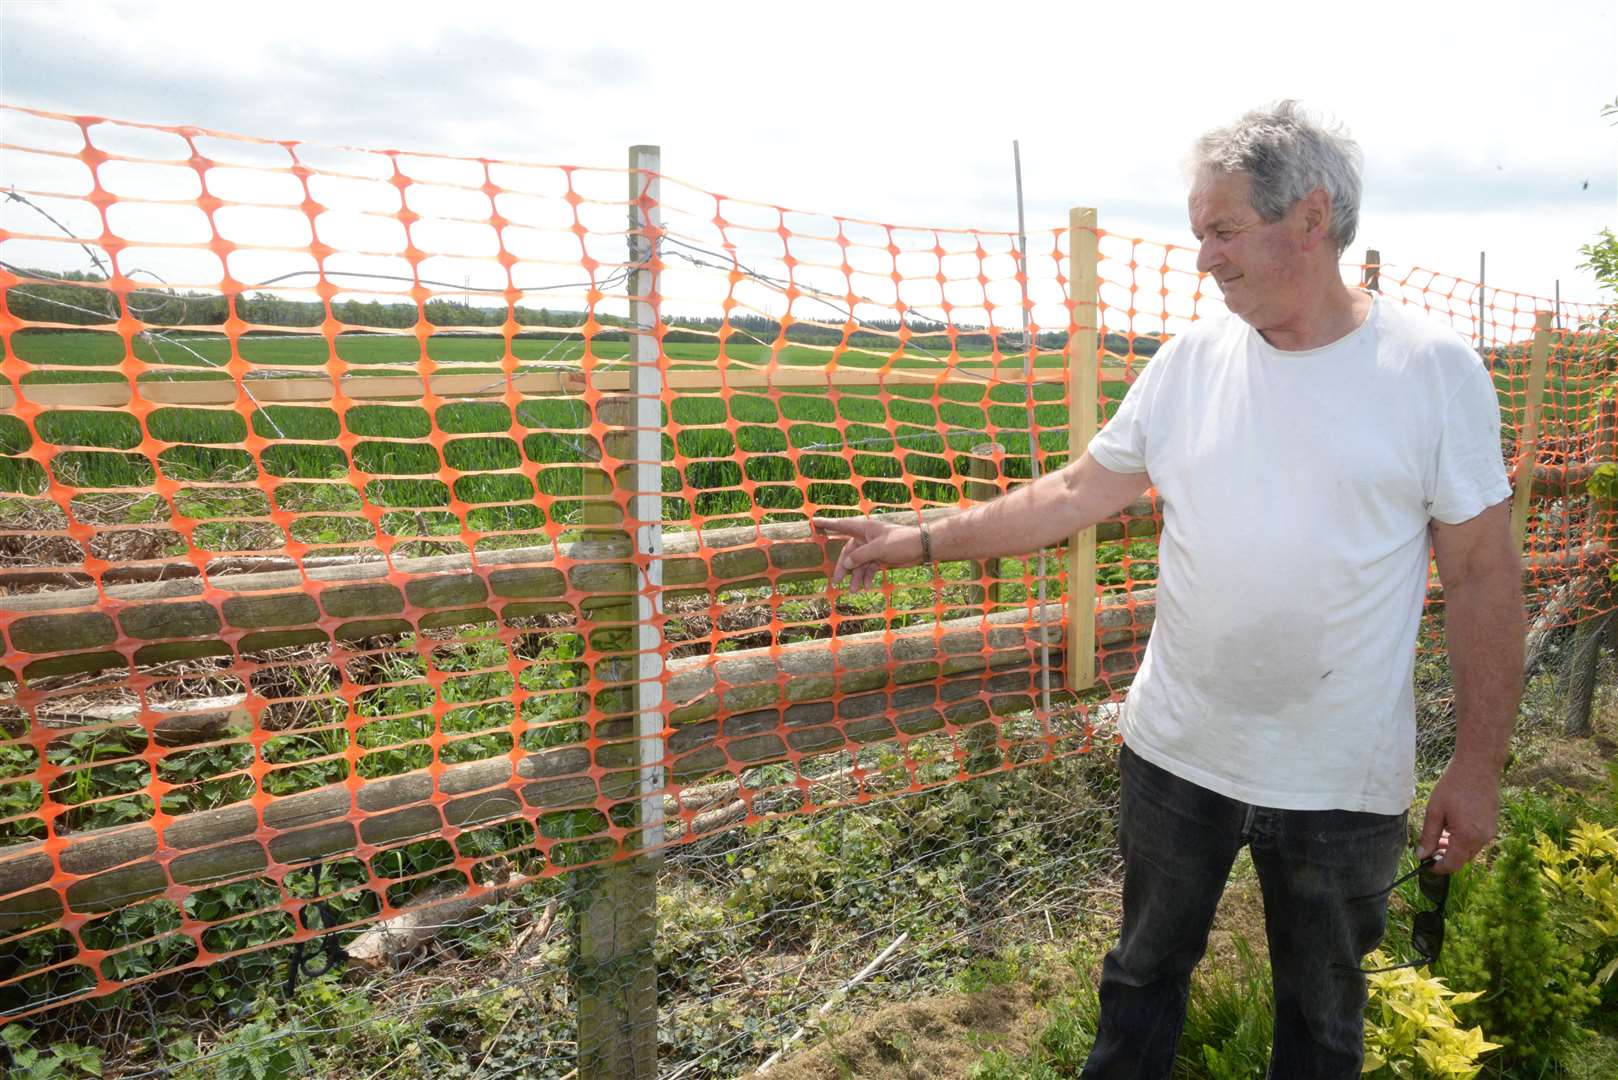 David Foulcer with the area of fencing that was cut to gain access to his garden